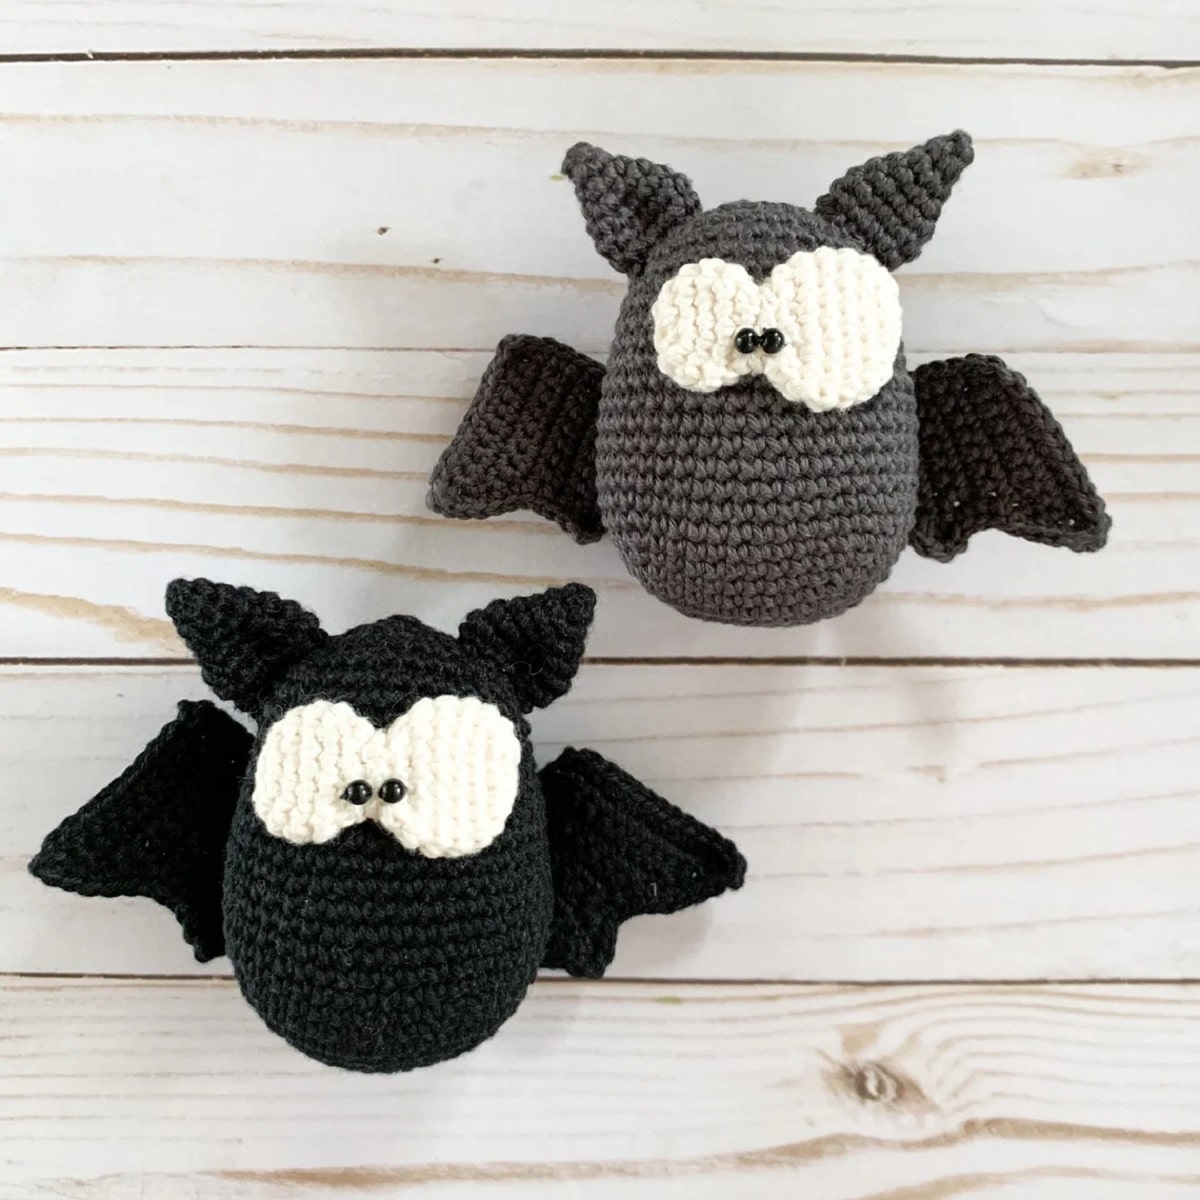 A black crochet bat with large white eyes next to a gray bat of the same style on a pale wooden background.